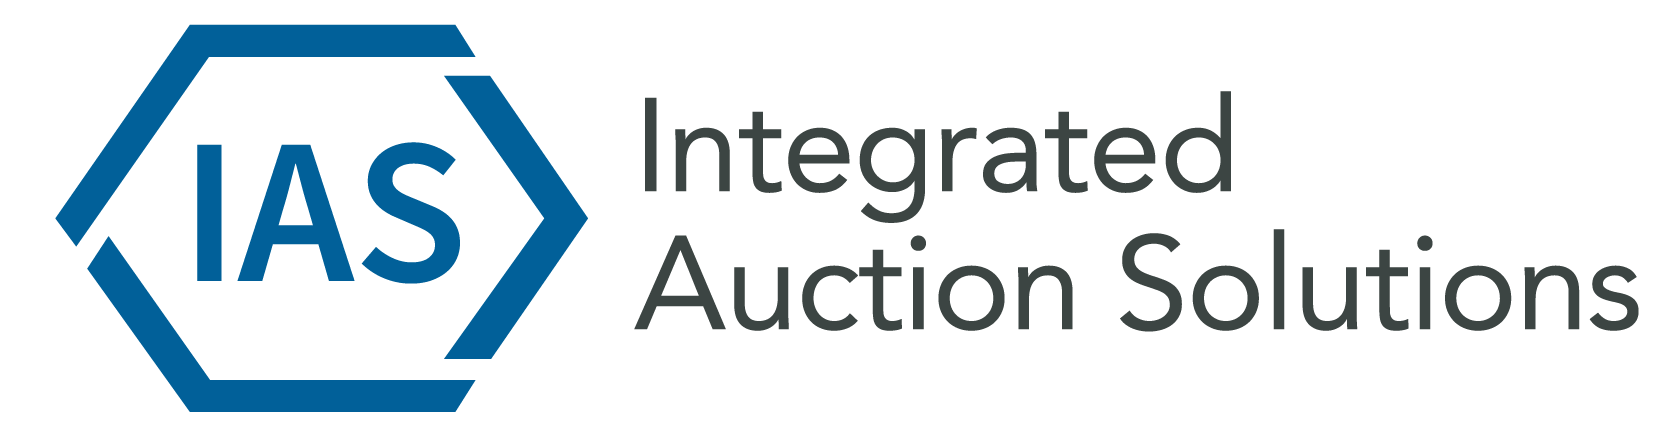 Integrated Auction Solutions logo